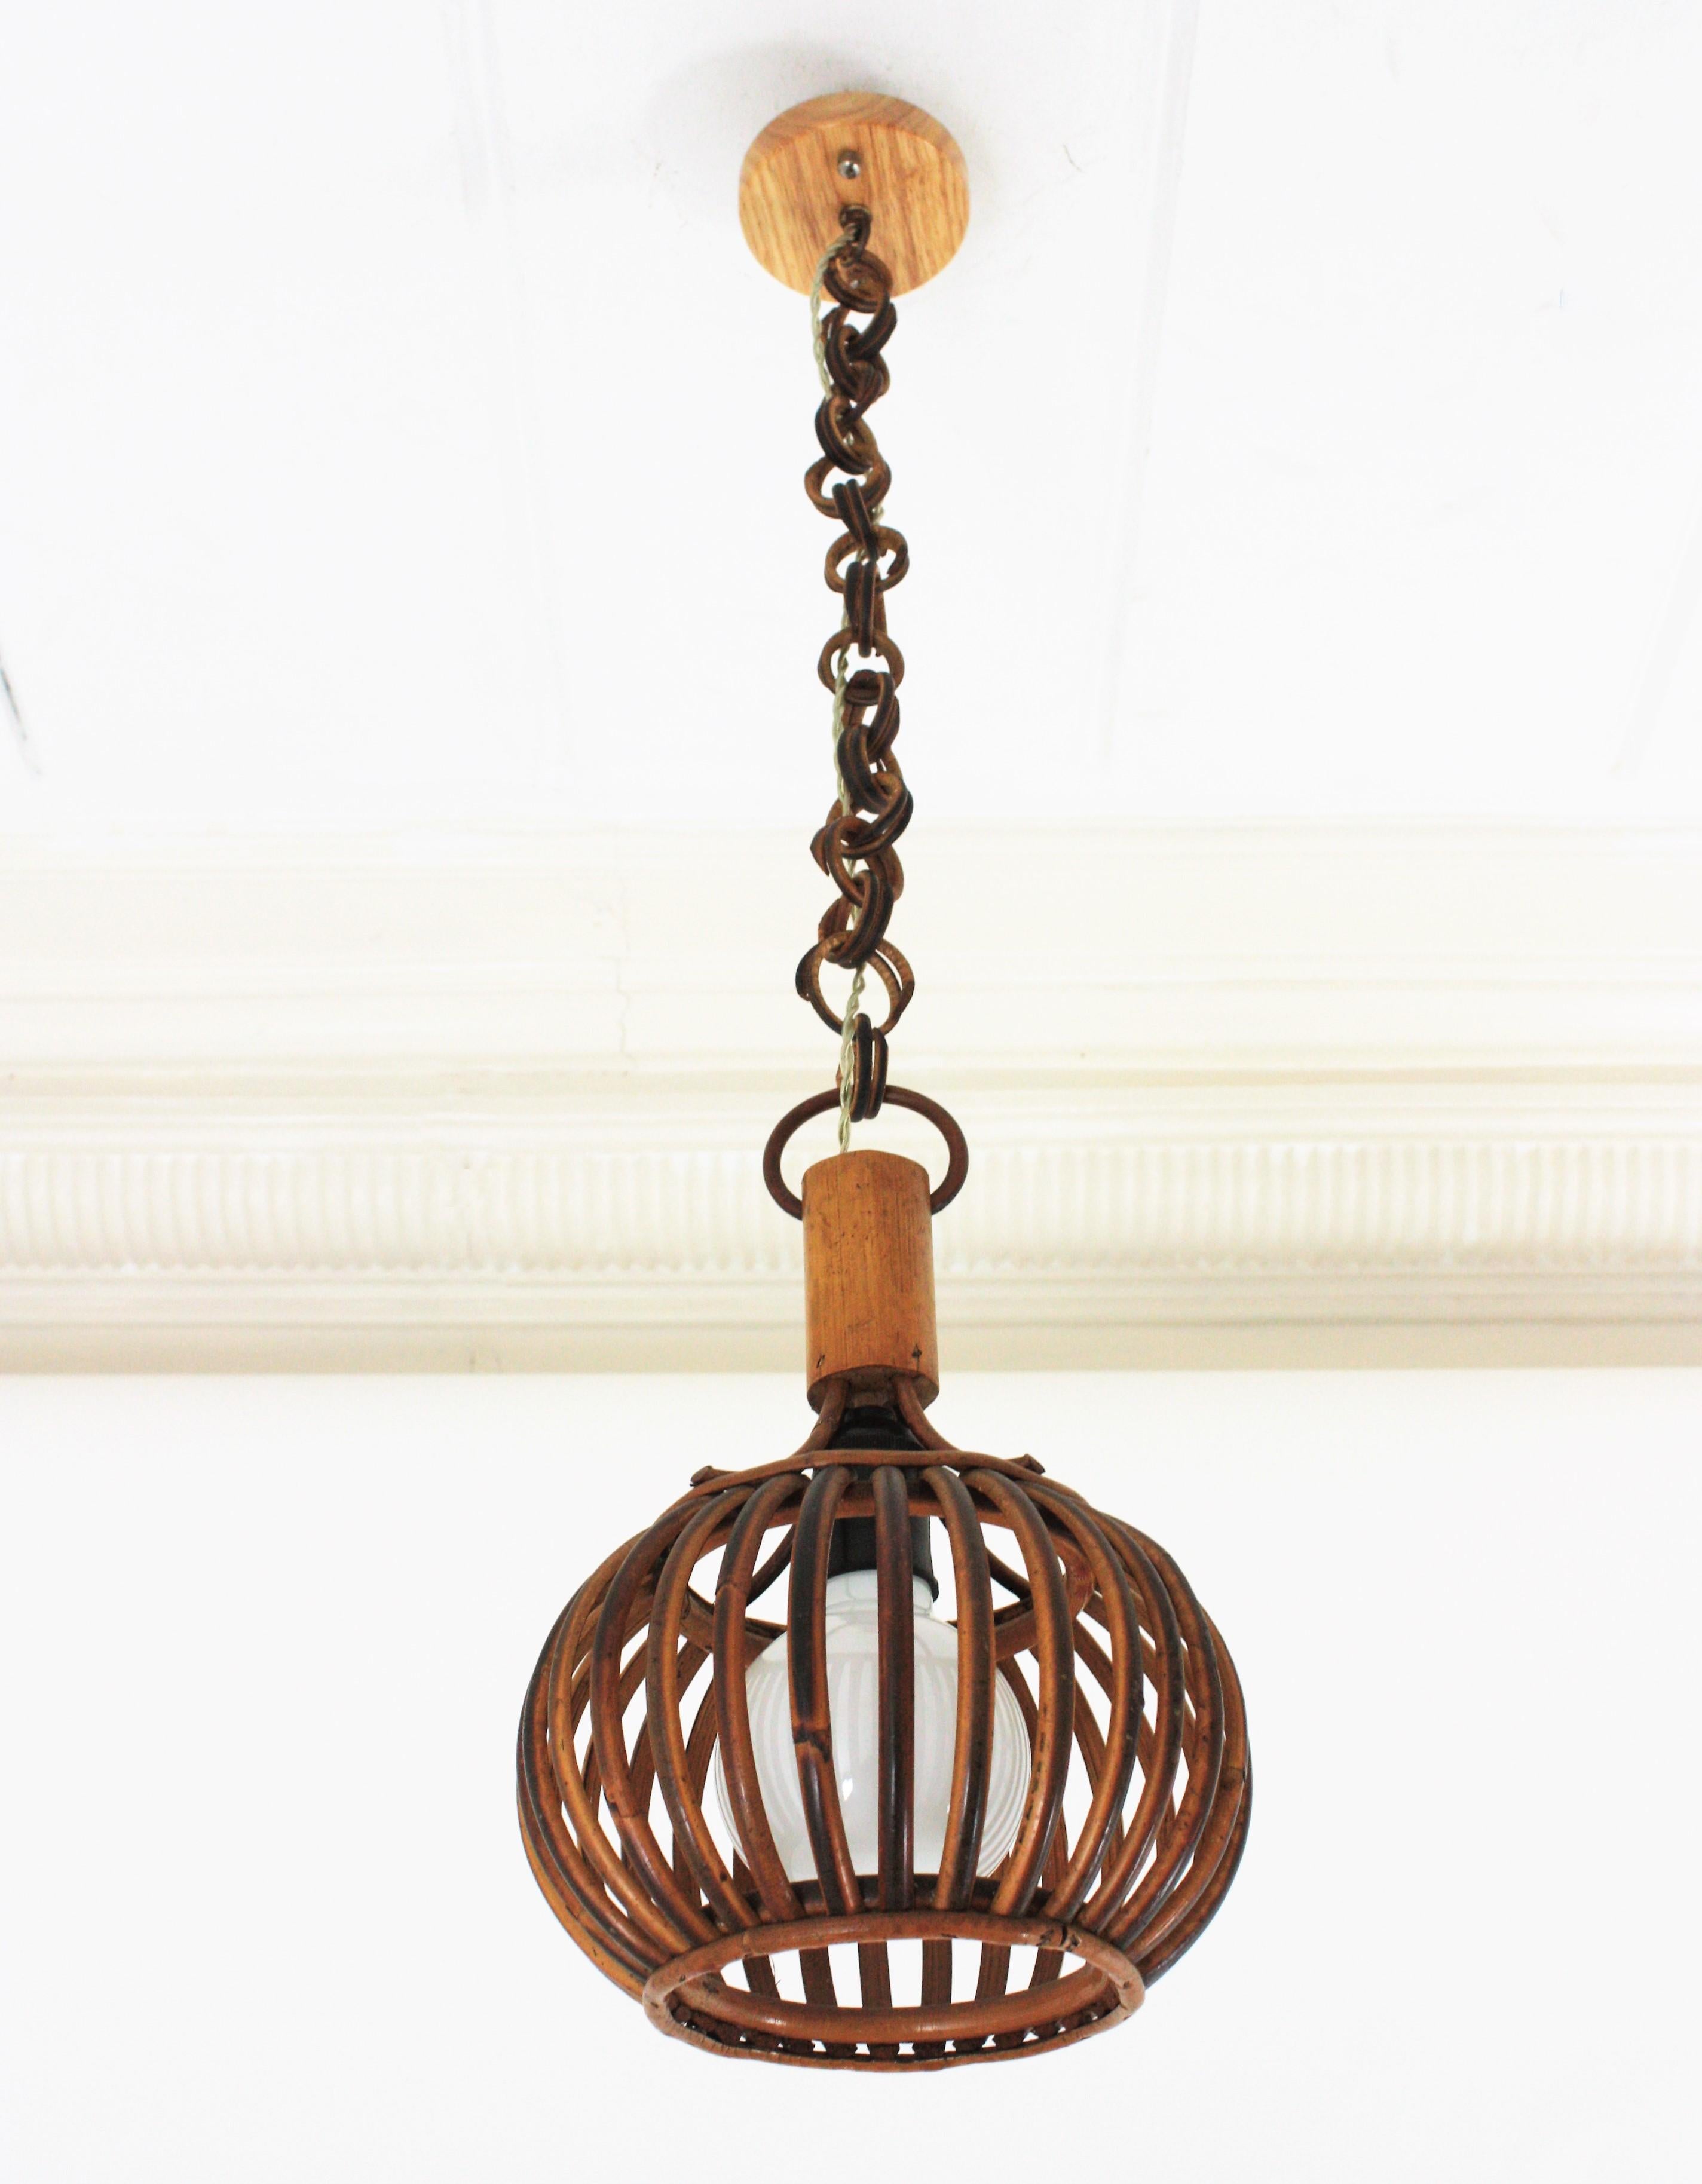 Eye-catching Louis Sognot attributed rattan ceiling pendant hanging light, France, 1950s
This lantern has an beautiful design featuring a semi-spherical rattan structure made of rattan curved canes topped by a wooden cylinder to hang the lampshade